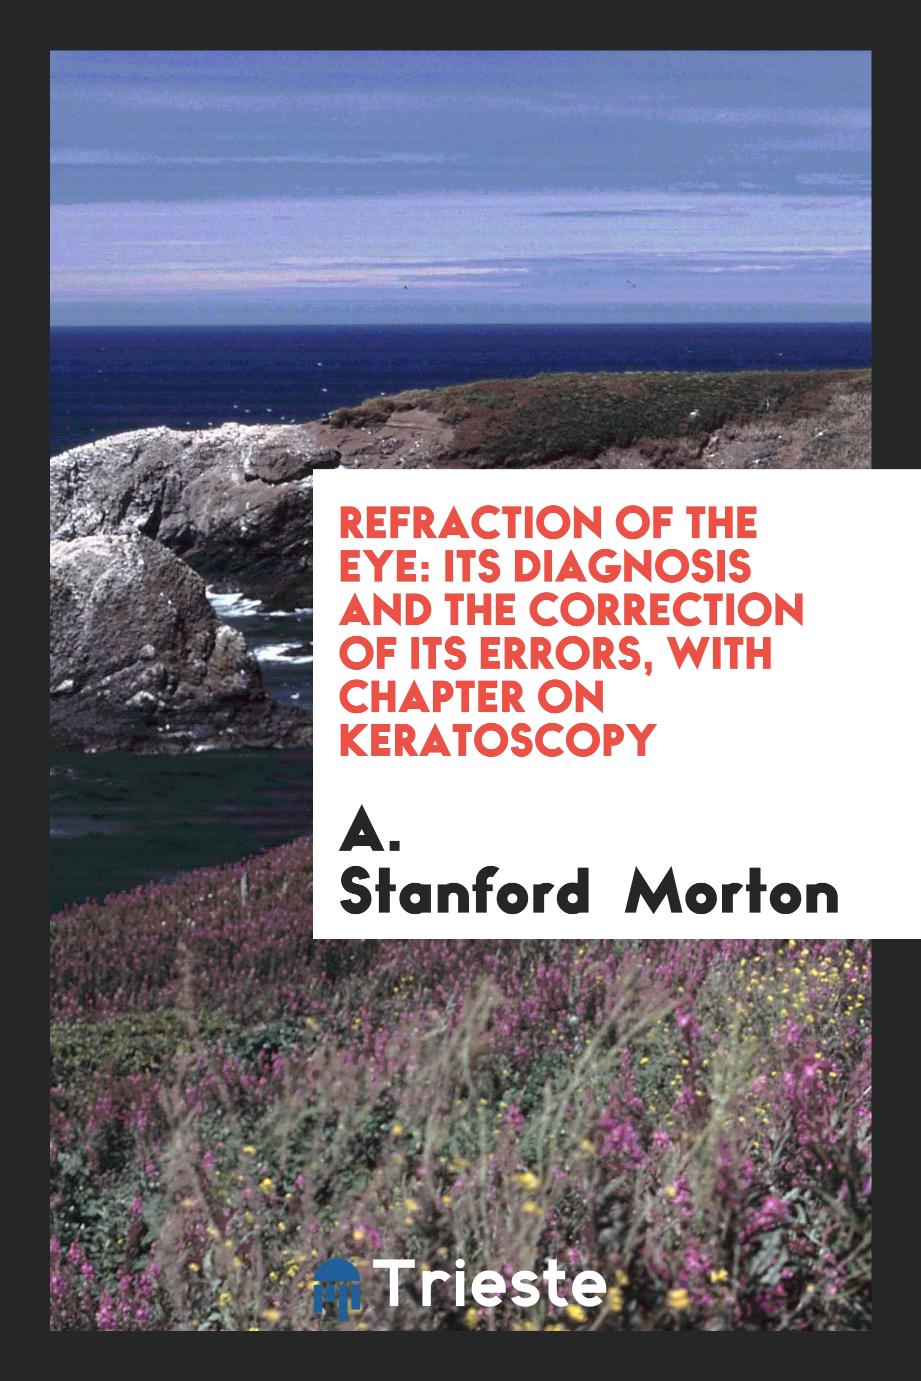 Refraction of the eye: Its Diagnosis and the Correction of Its Errors, with Chapter on Keratoscopy